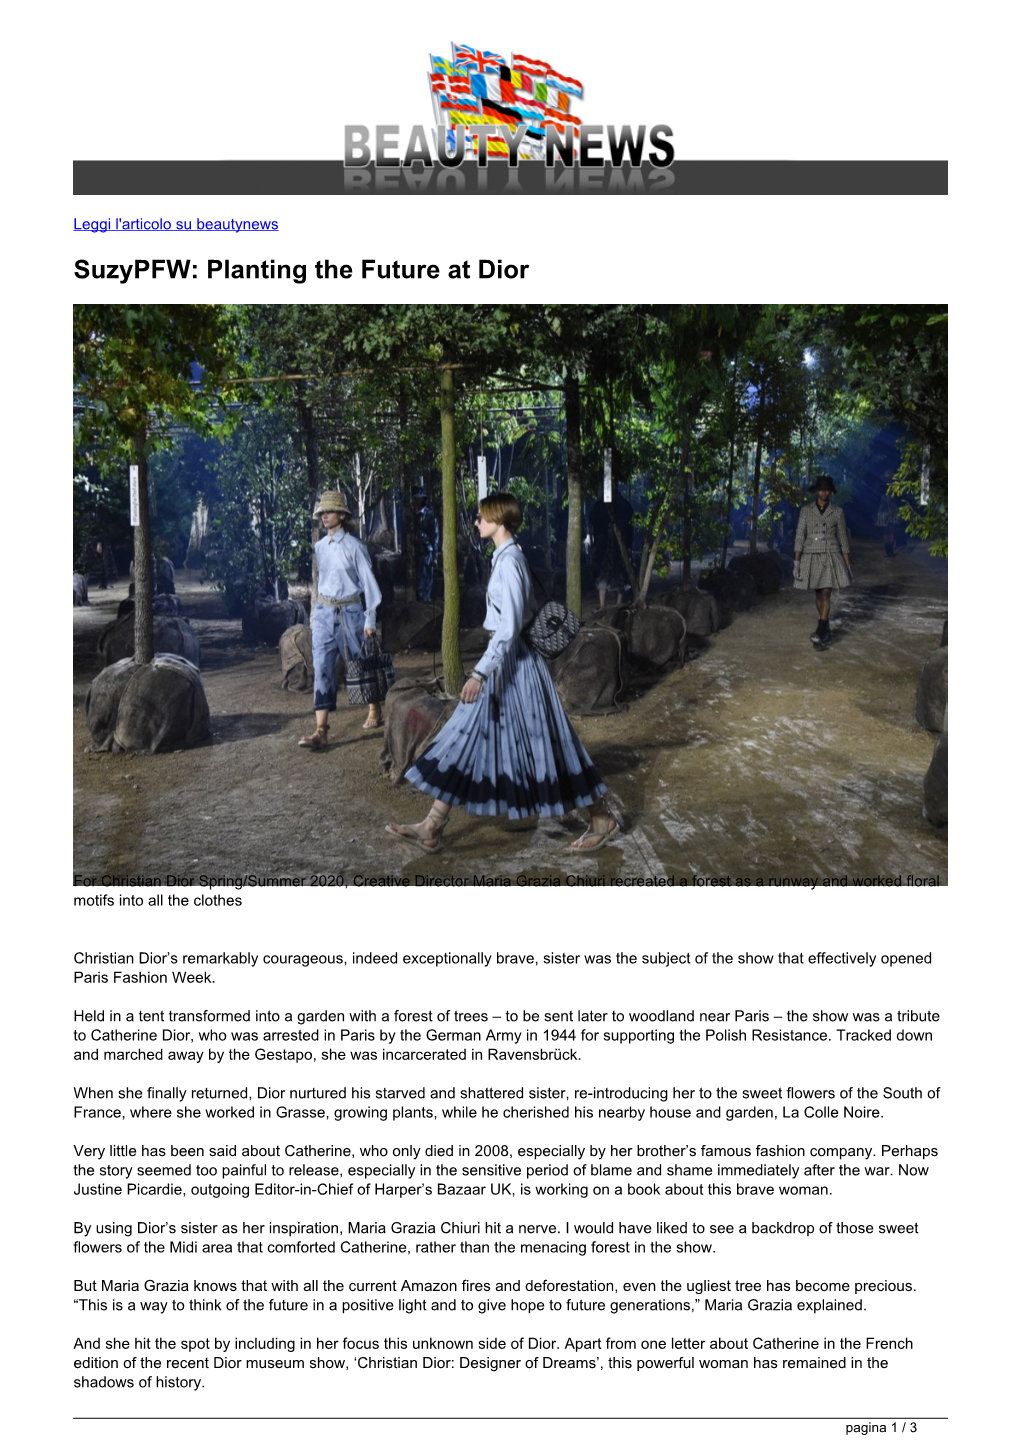 Suzypfw: Planting the Future at Dior